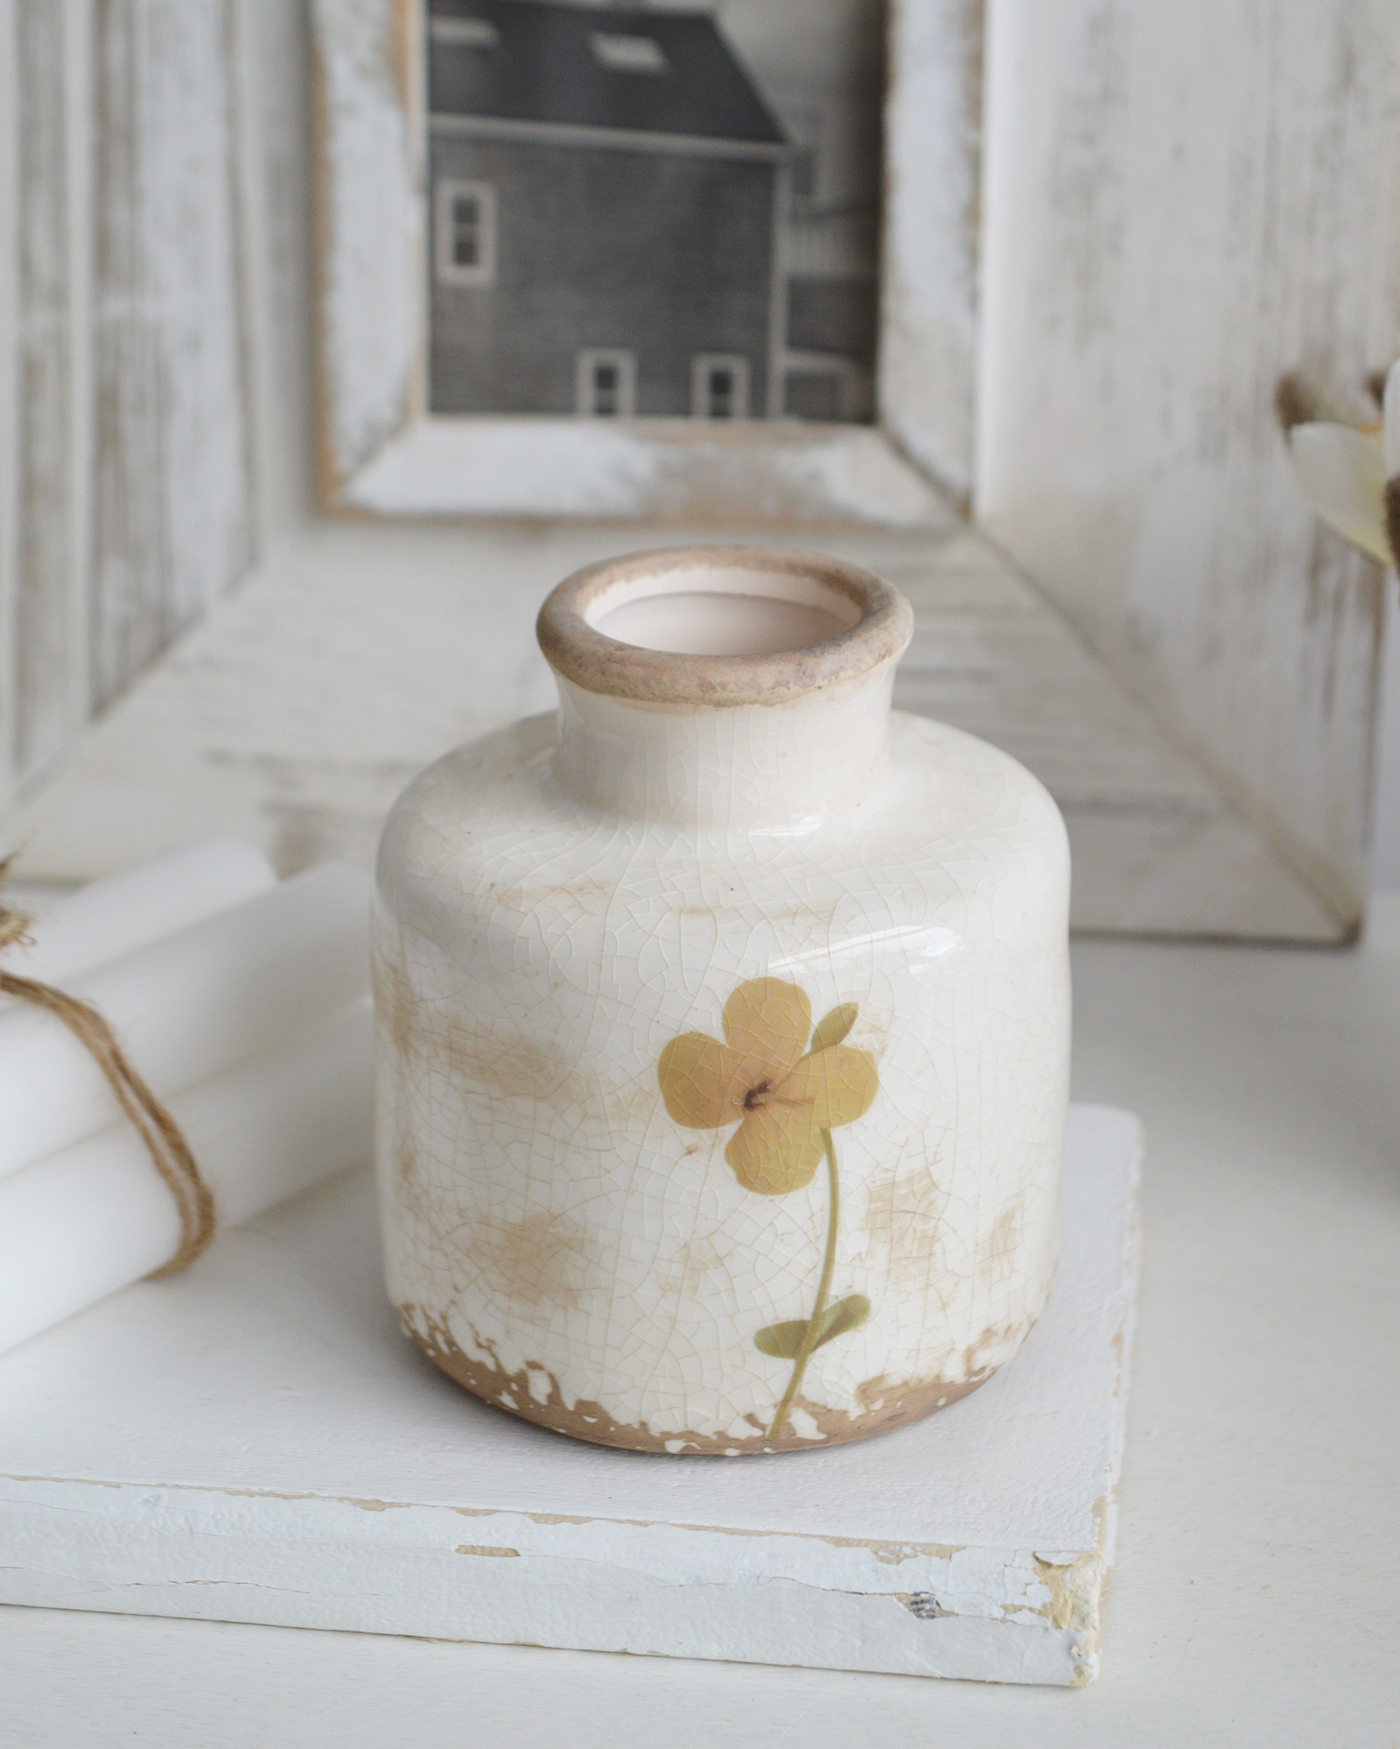 Charlotte vase with a crackled glazed finish  with flowers for New England, Country and coastal home interior decor